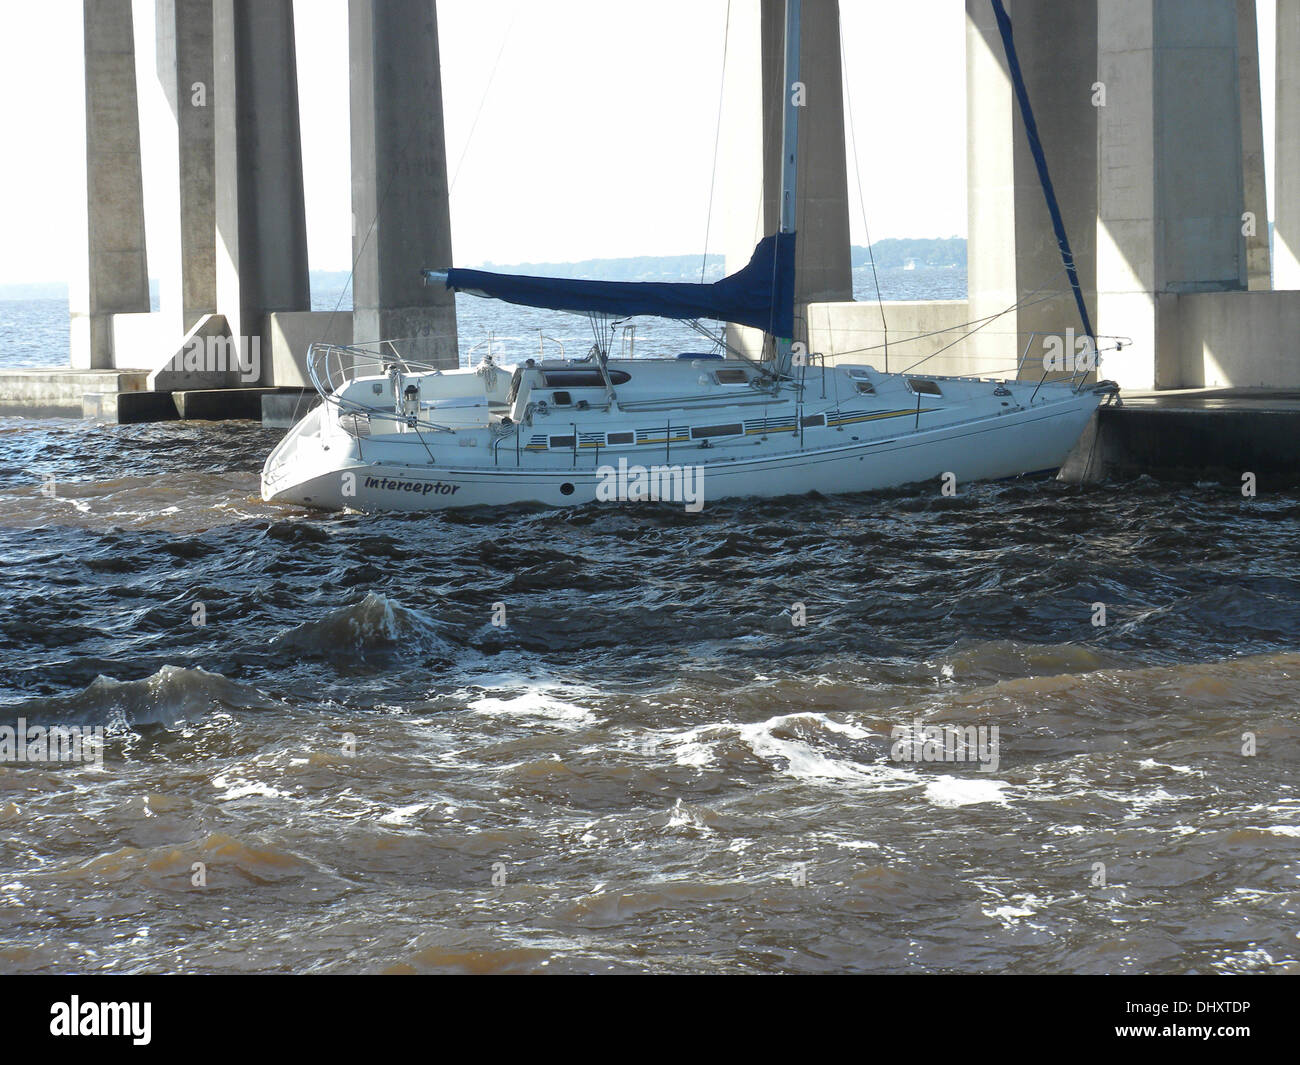 The Coast Guard is responding after receiving reports that a 38-foot sailboat struck the Buckman Bridge in Jacksonville, Fla., Thursday, Nov. 14, 2013. The sailboat, named Interceptor, broke free from its mooring at Mulberry Cove Marina in Jacksonville be Stock Photo